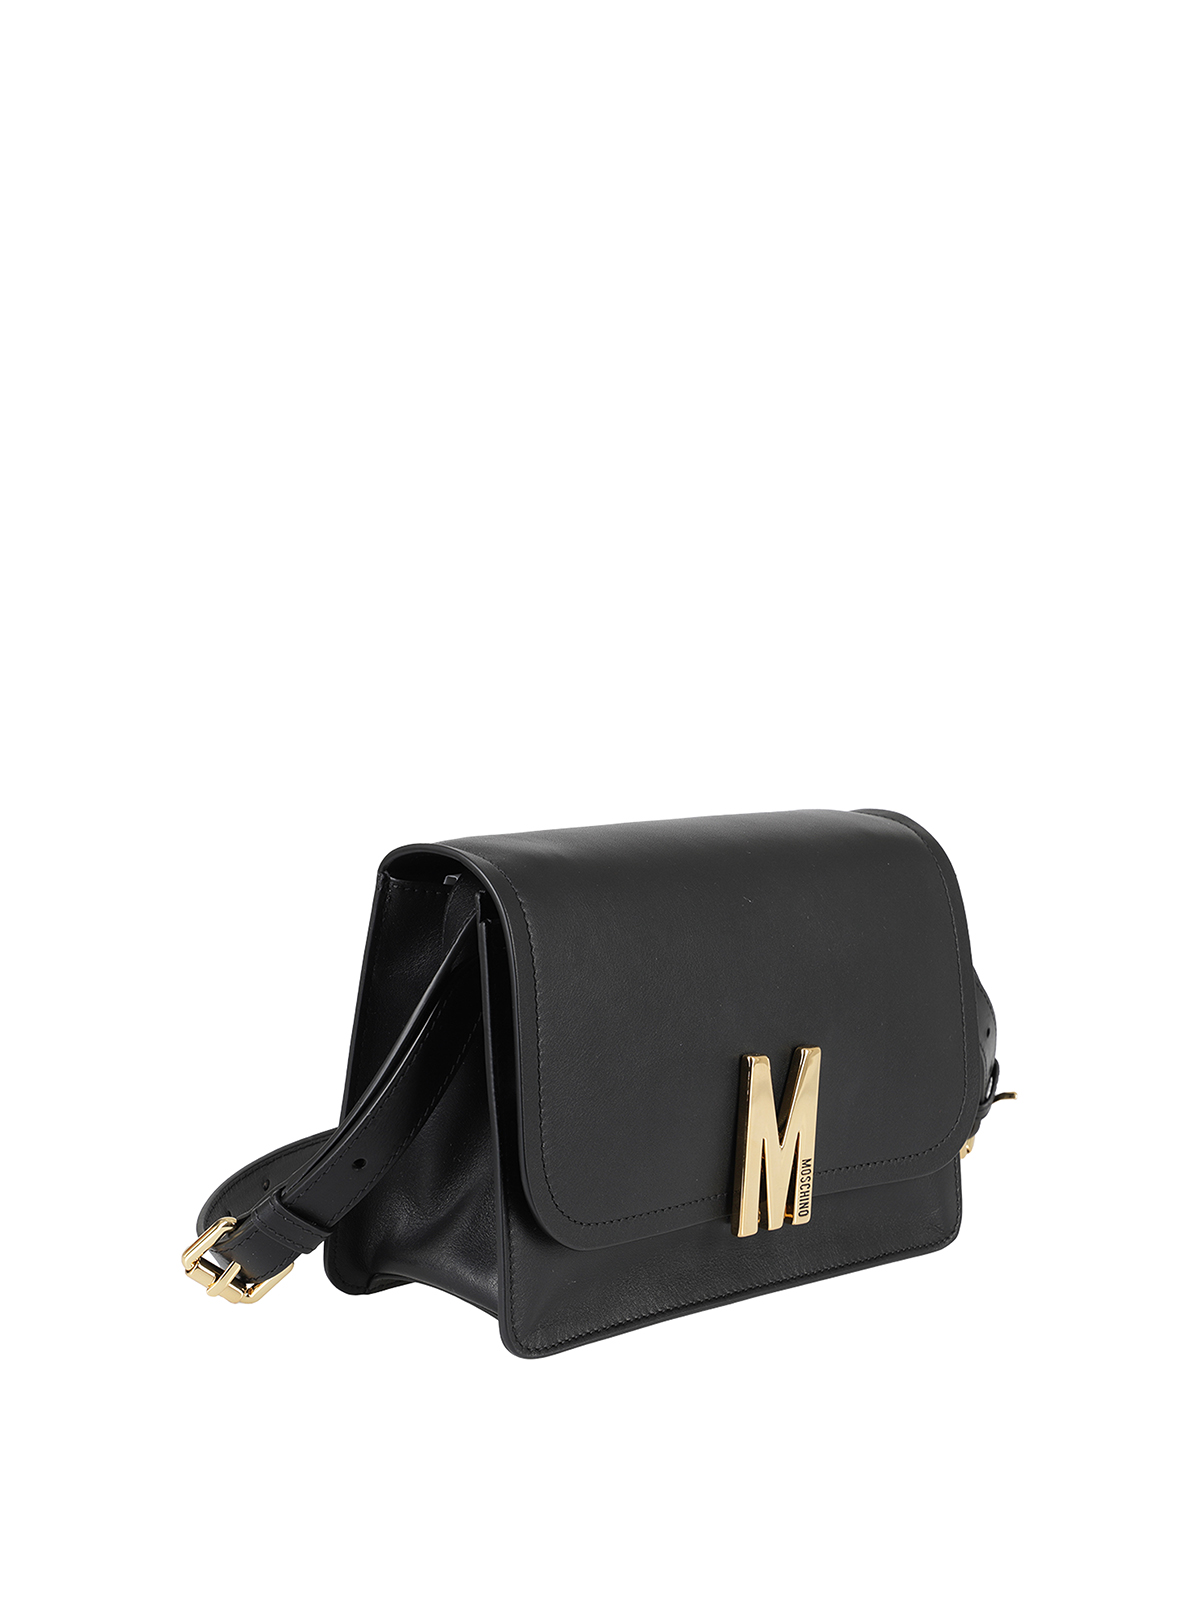 Shop Moschino Leather Bag In Black